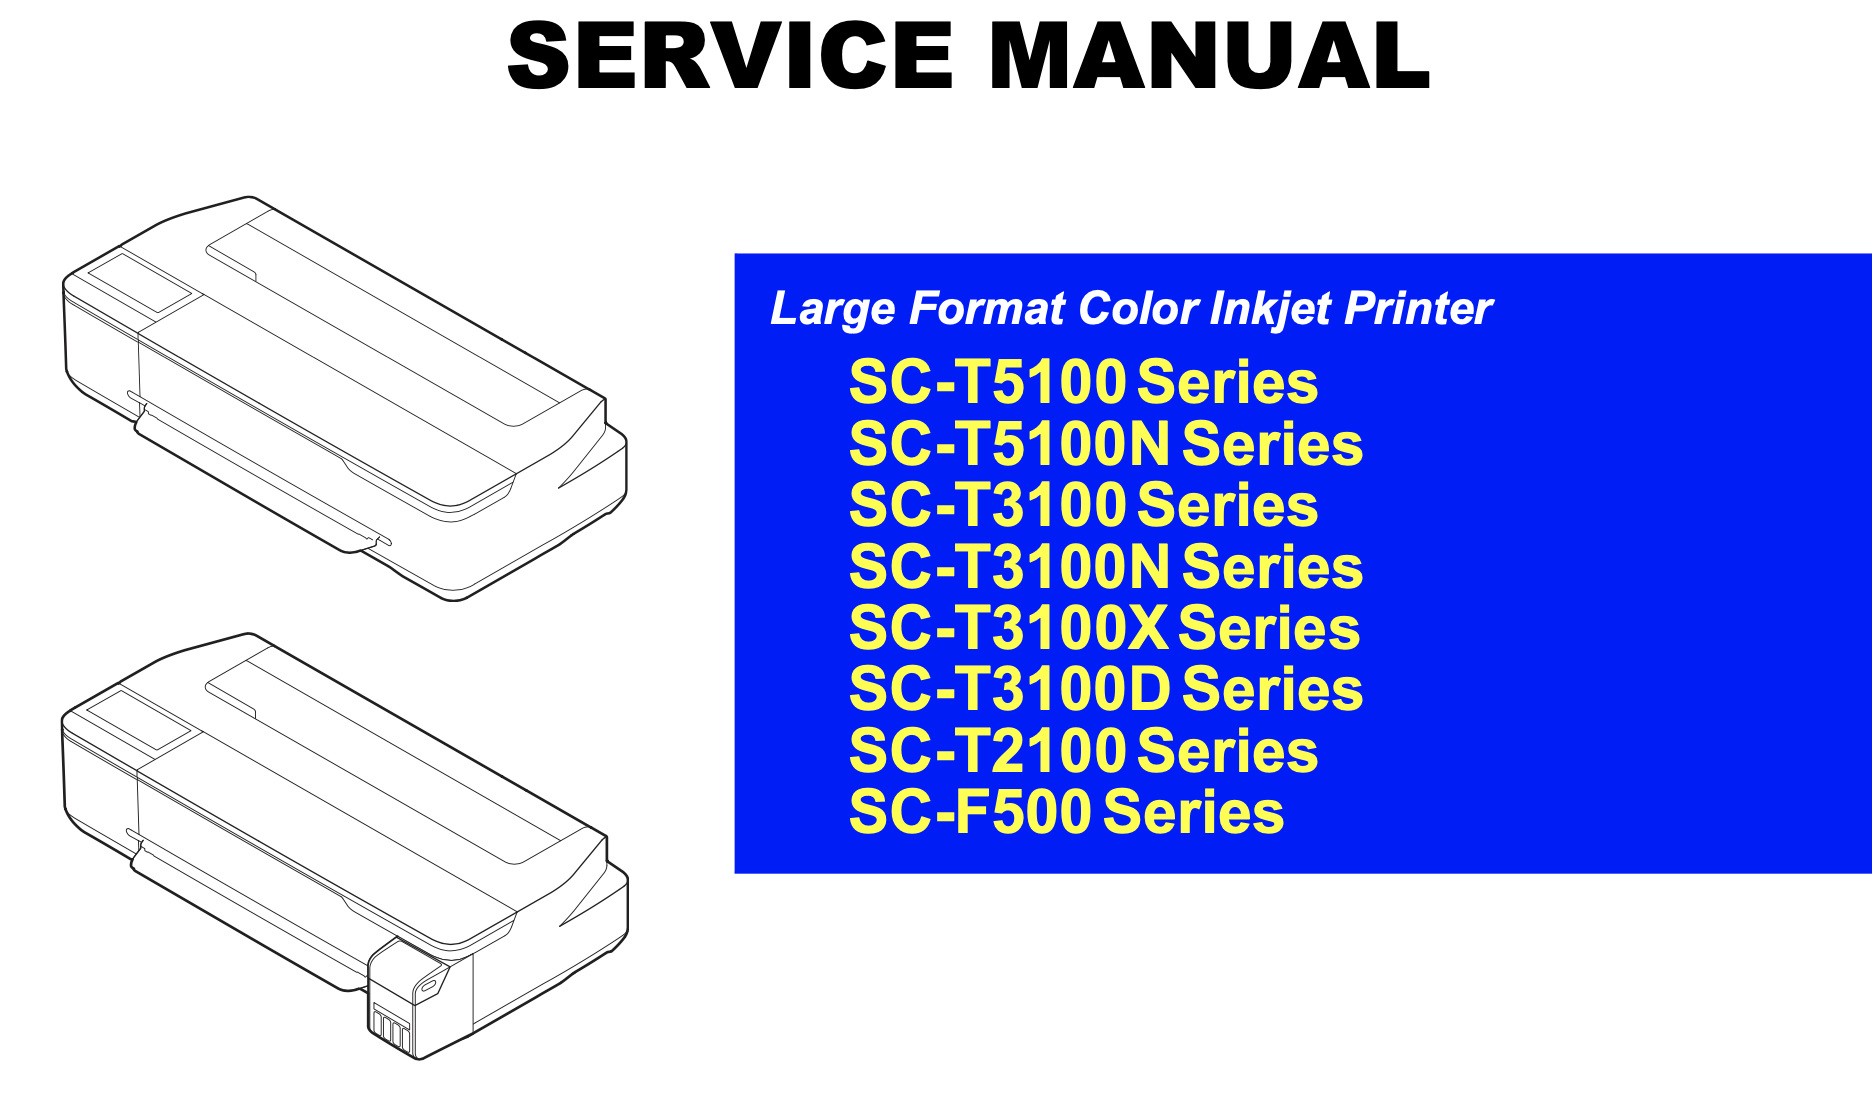 Epson SureColor SC-T2100, SC-T3100, SC-T3100N, SC-T3100X, SC-T3100D, SC-T5100, SC-T5100N, SC-F500  Service  Manual and Block Wiring Diagram <font color=red>New!</font>